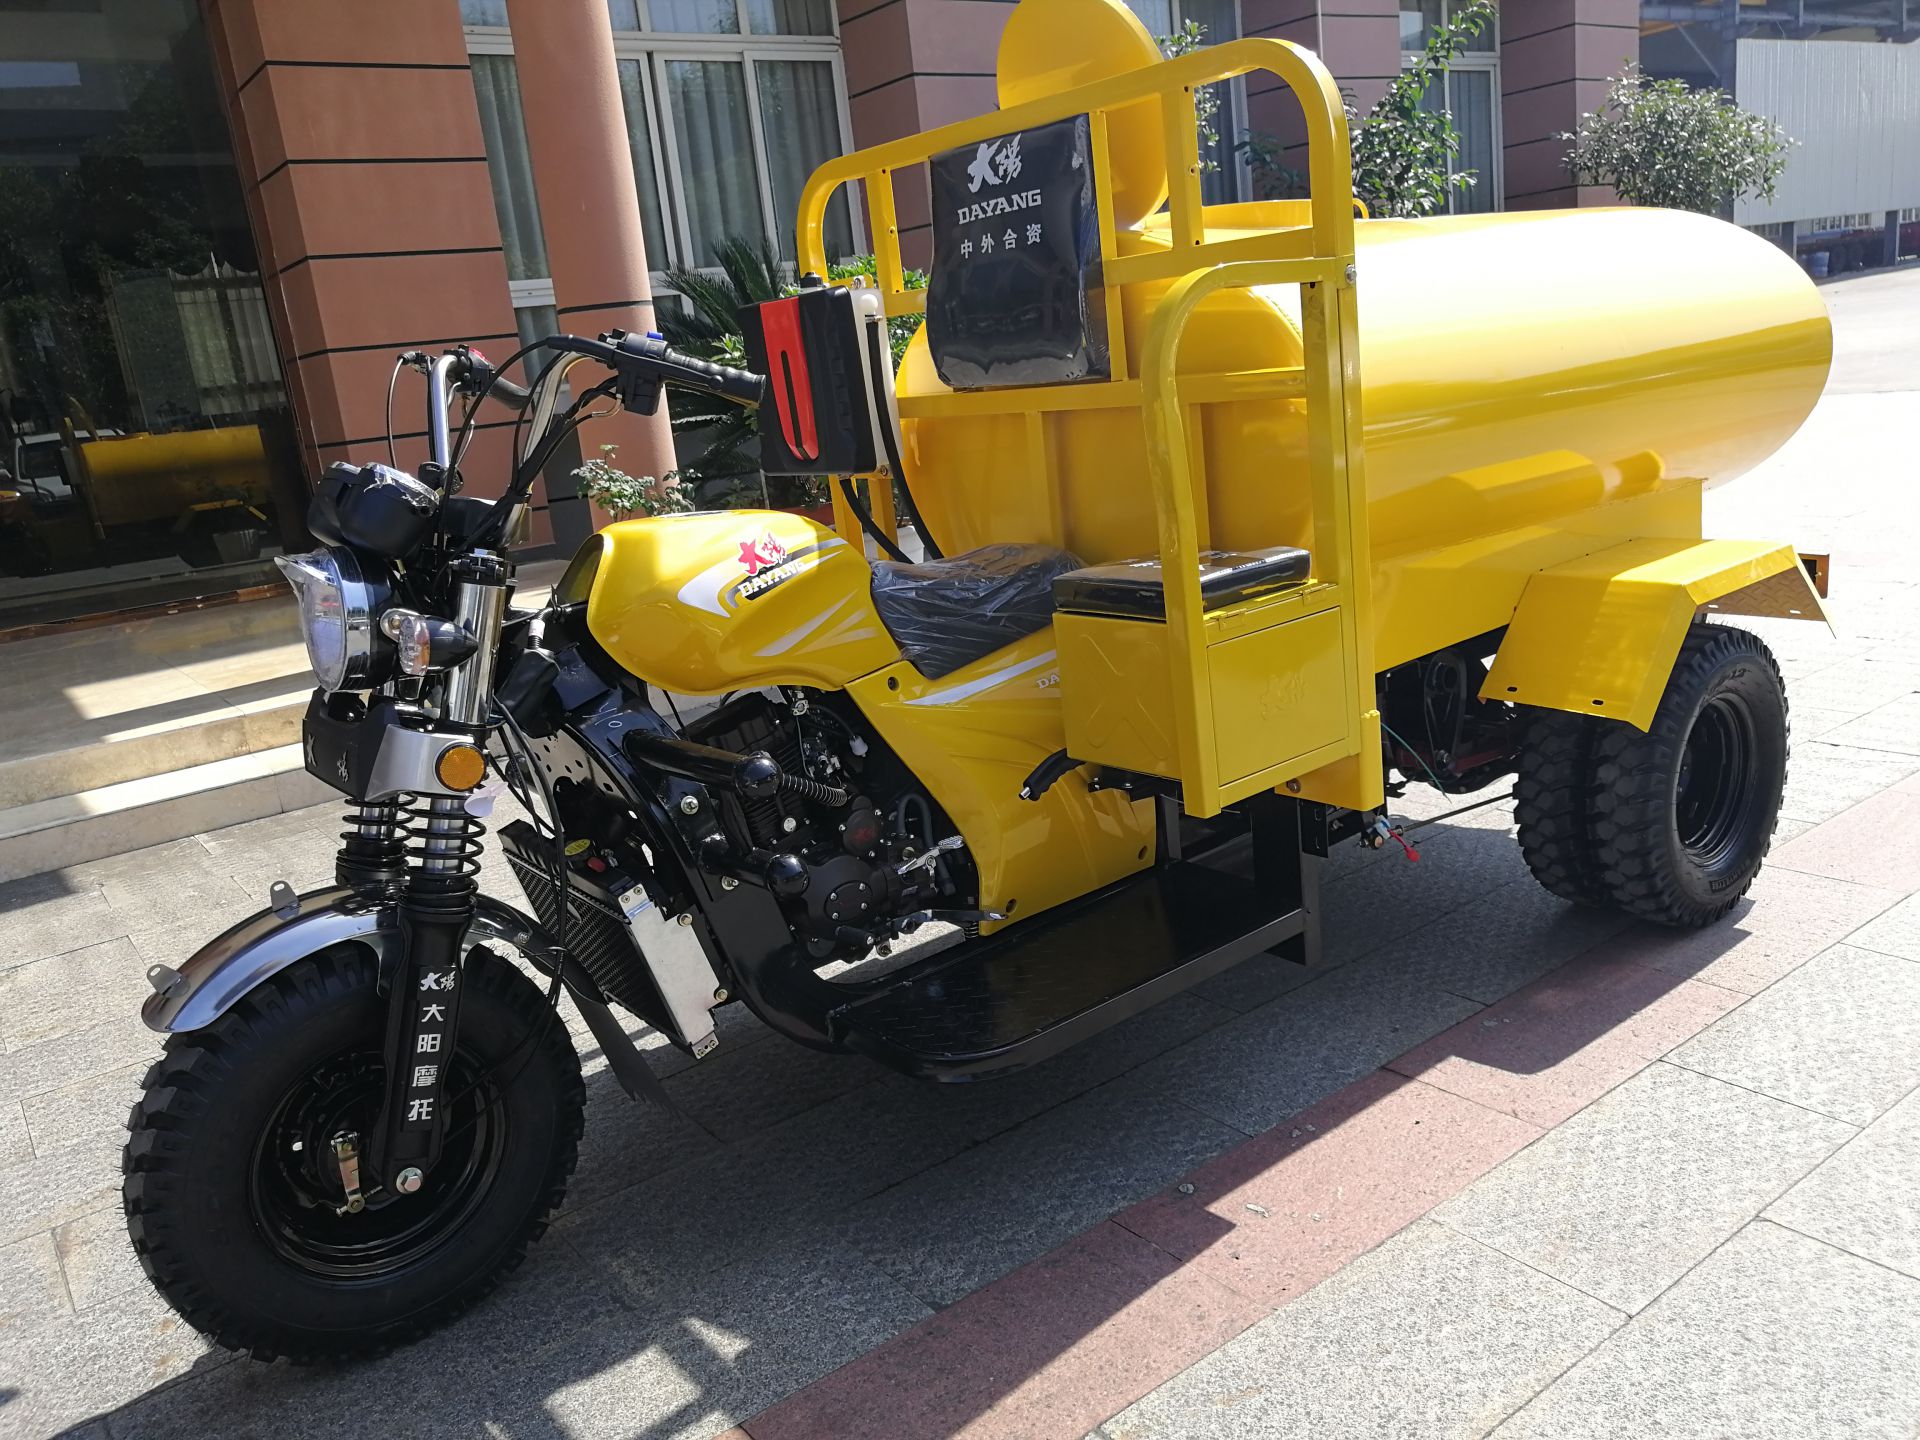 DAYANG water tanker tricycle Displacement 200CC/250CC/300CC capacity 1000L 1600L Sprinkler tricycle Fire tricycle